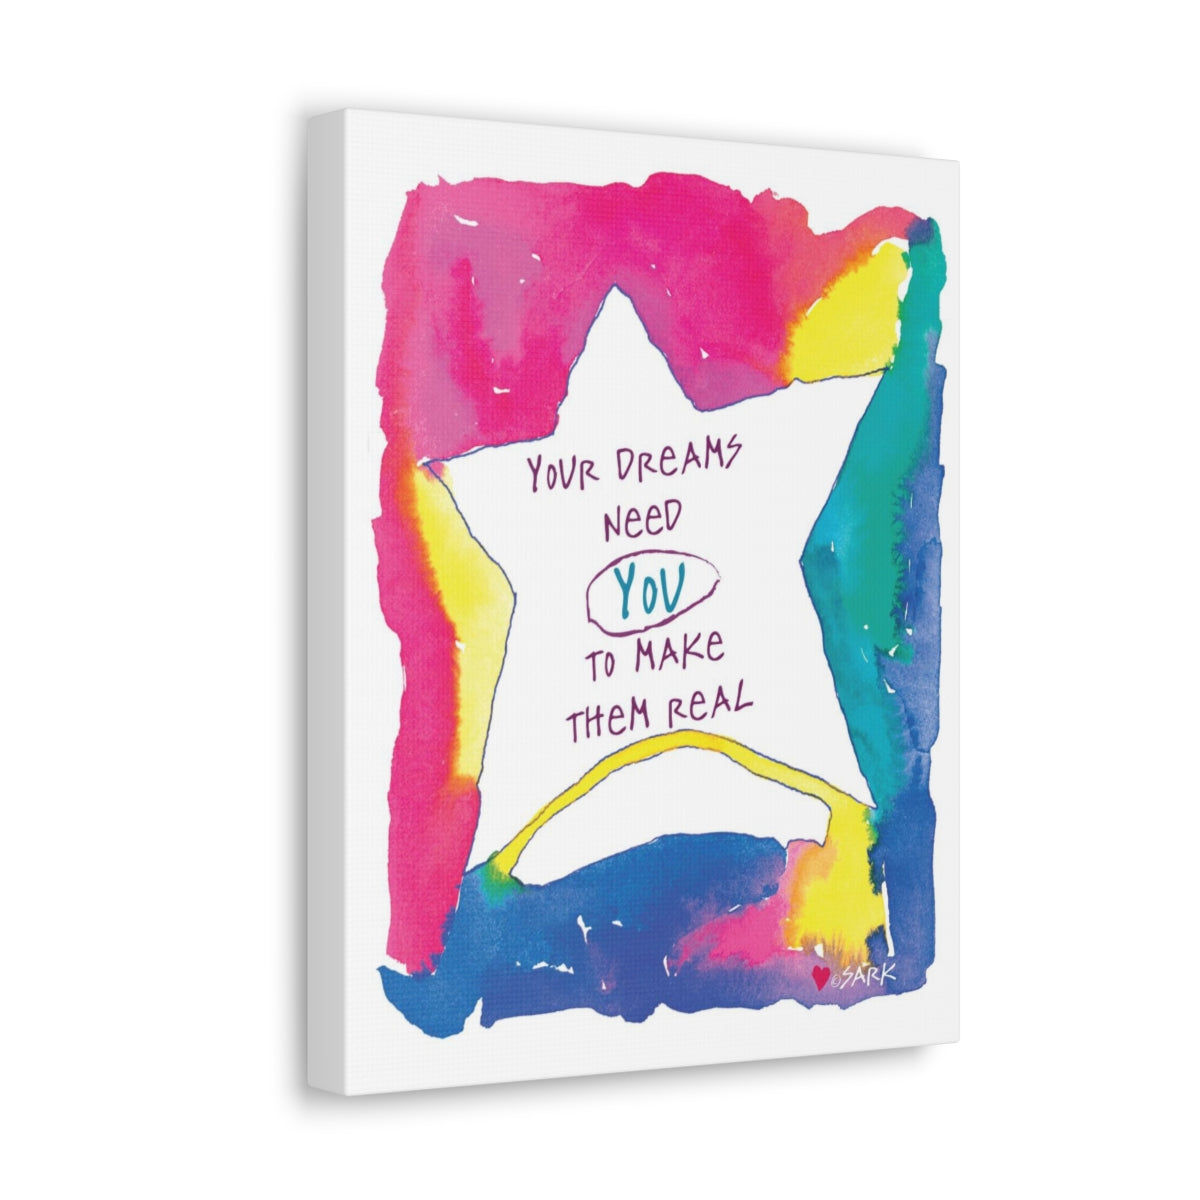 Your Dreams Need You To Make Them REAL by SARK - Canvas Gallery Wraps